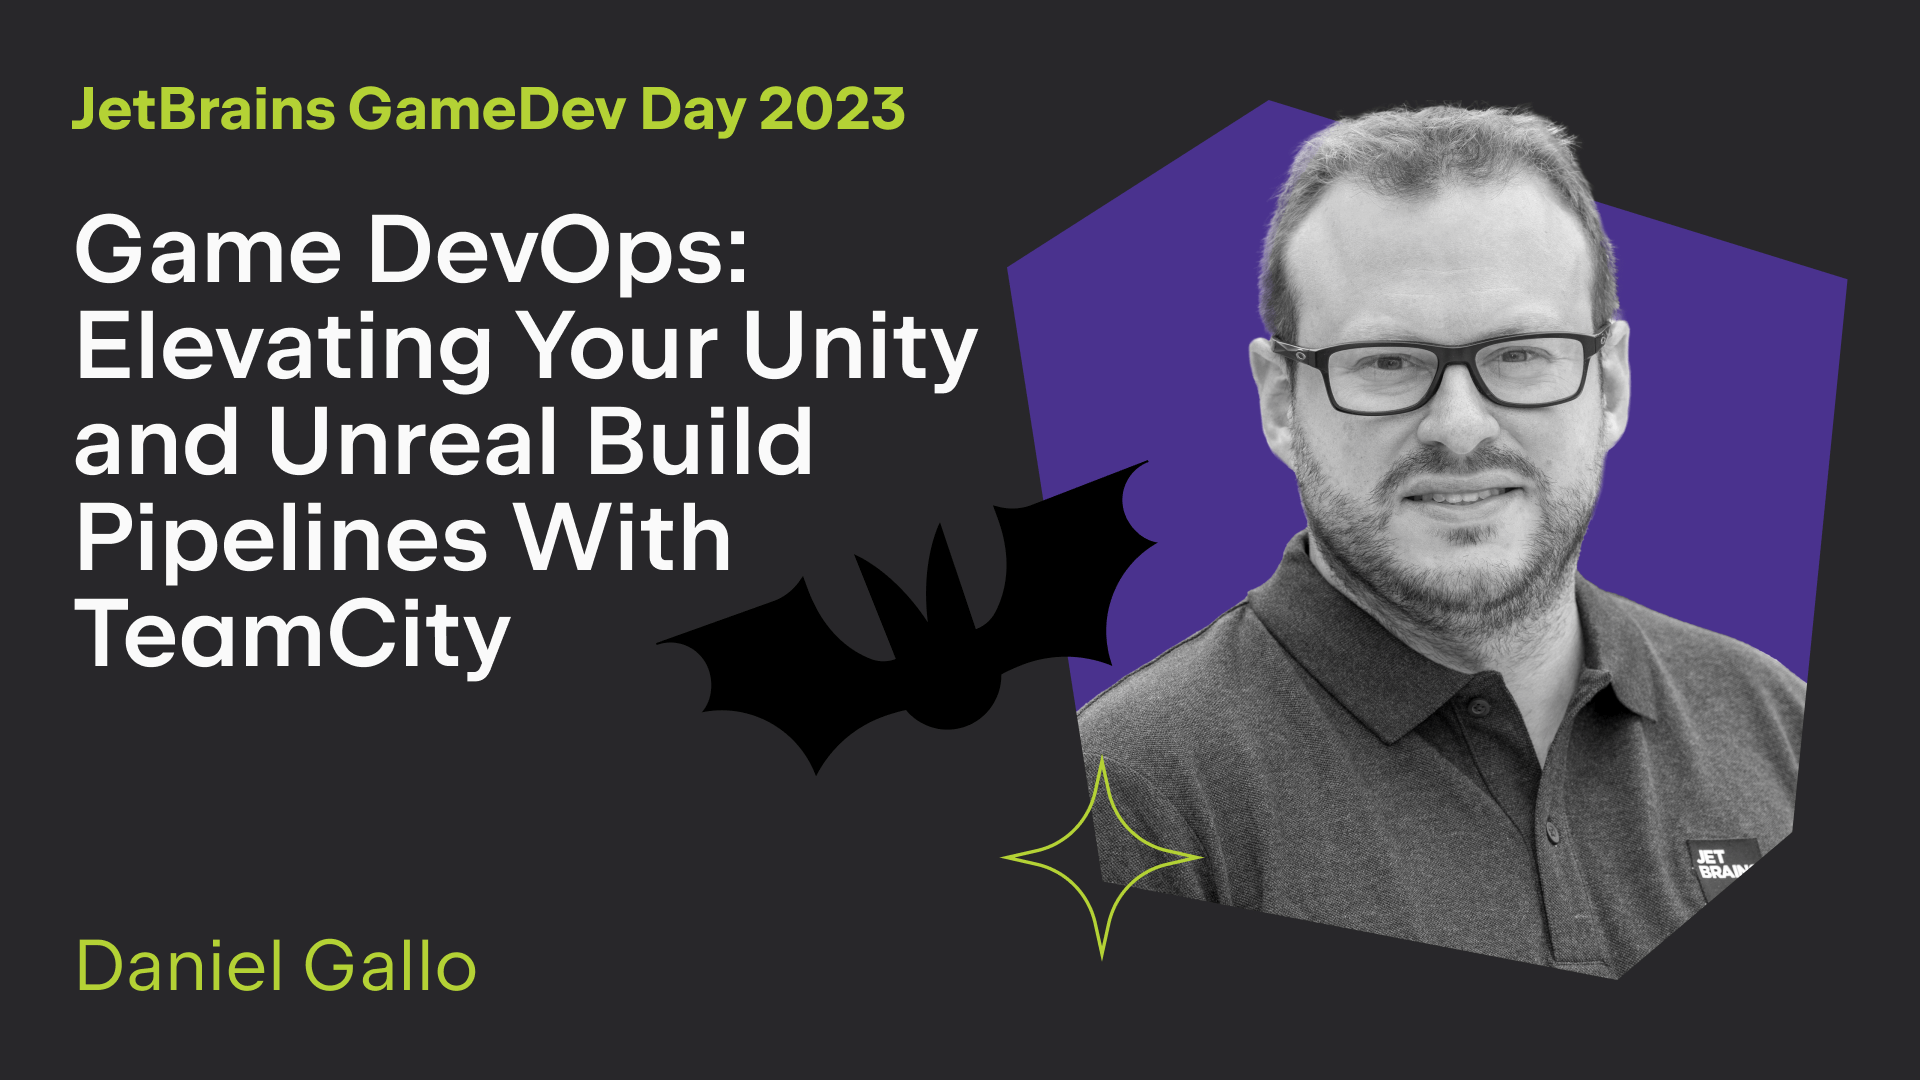 Game DevOps - Elevating Your Unity and Unreal Build Pipelines With TeamCity